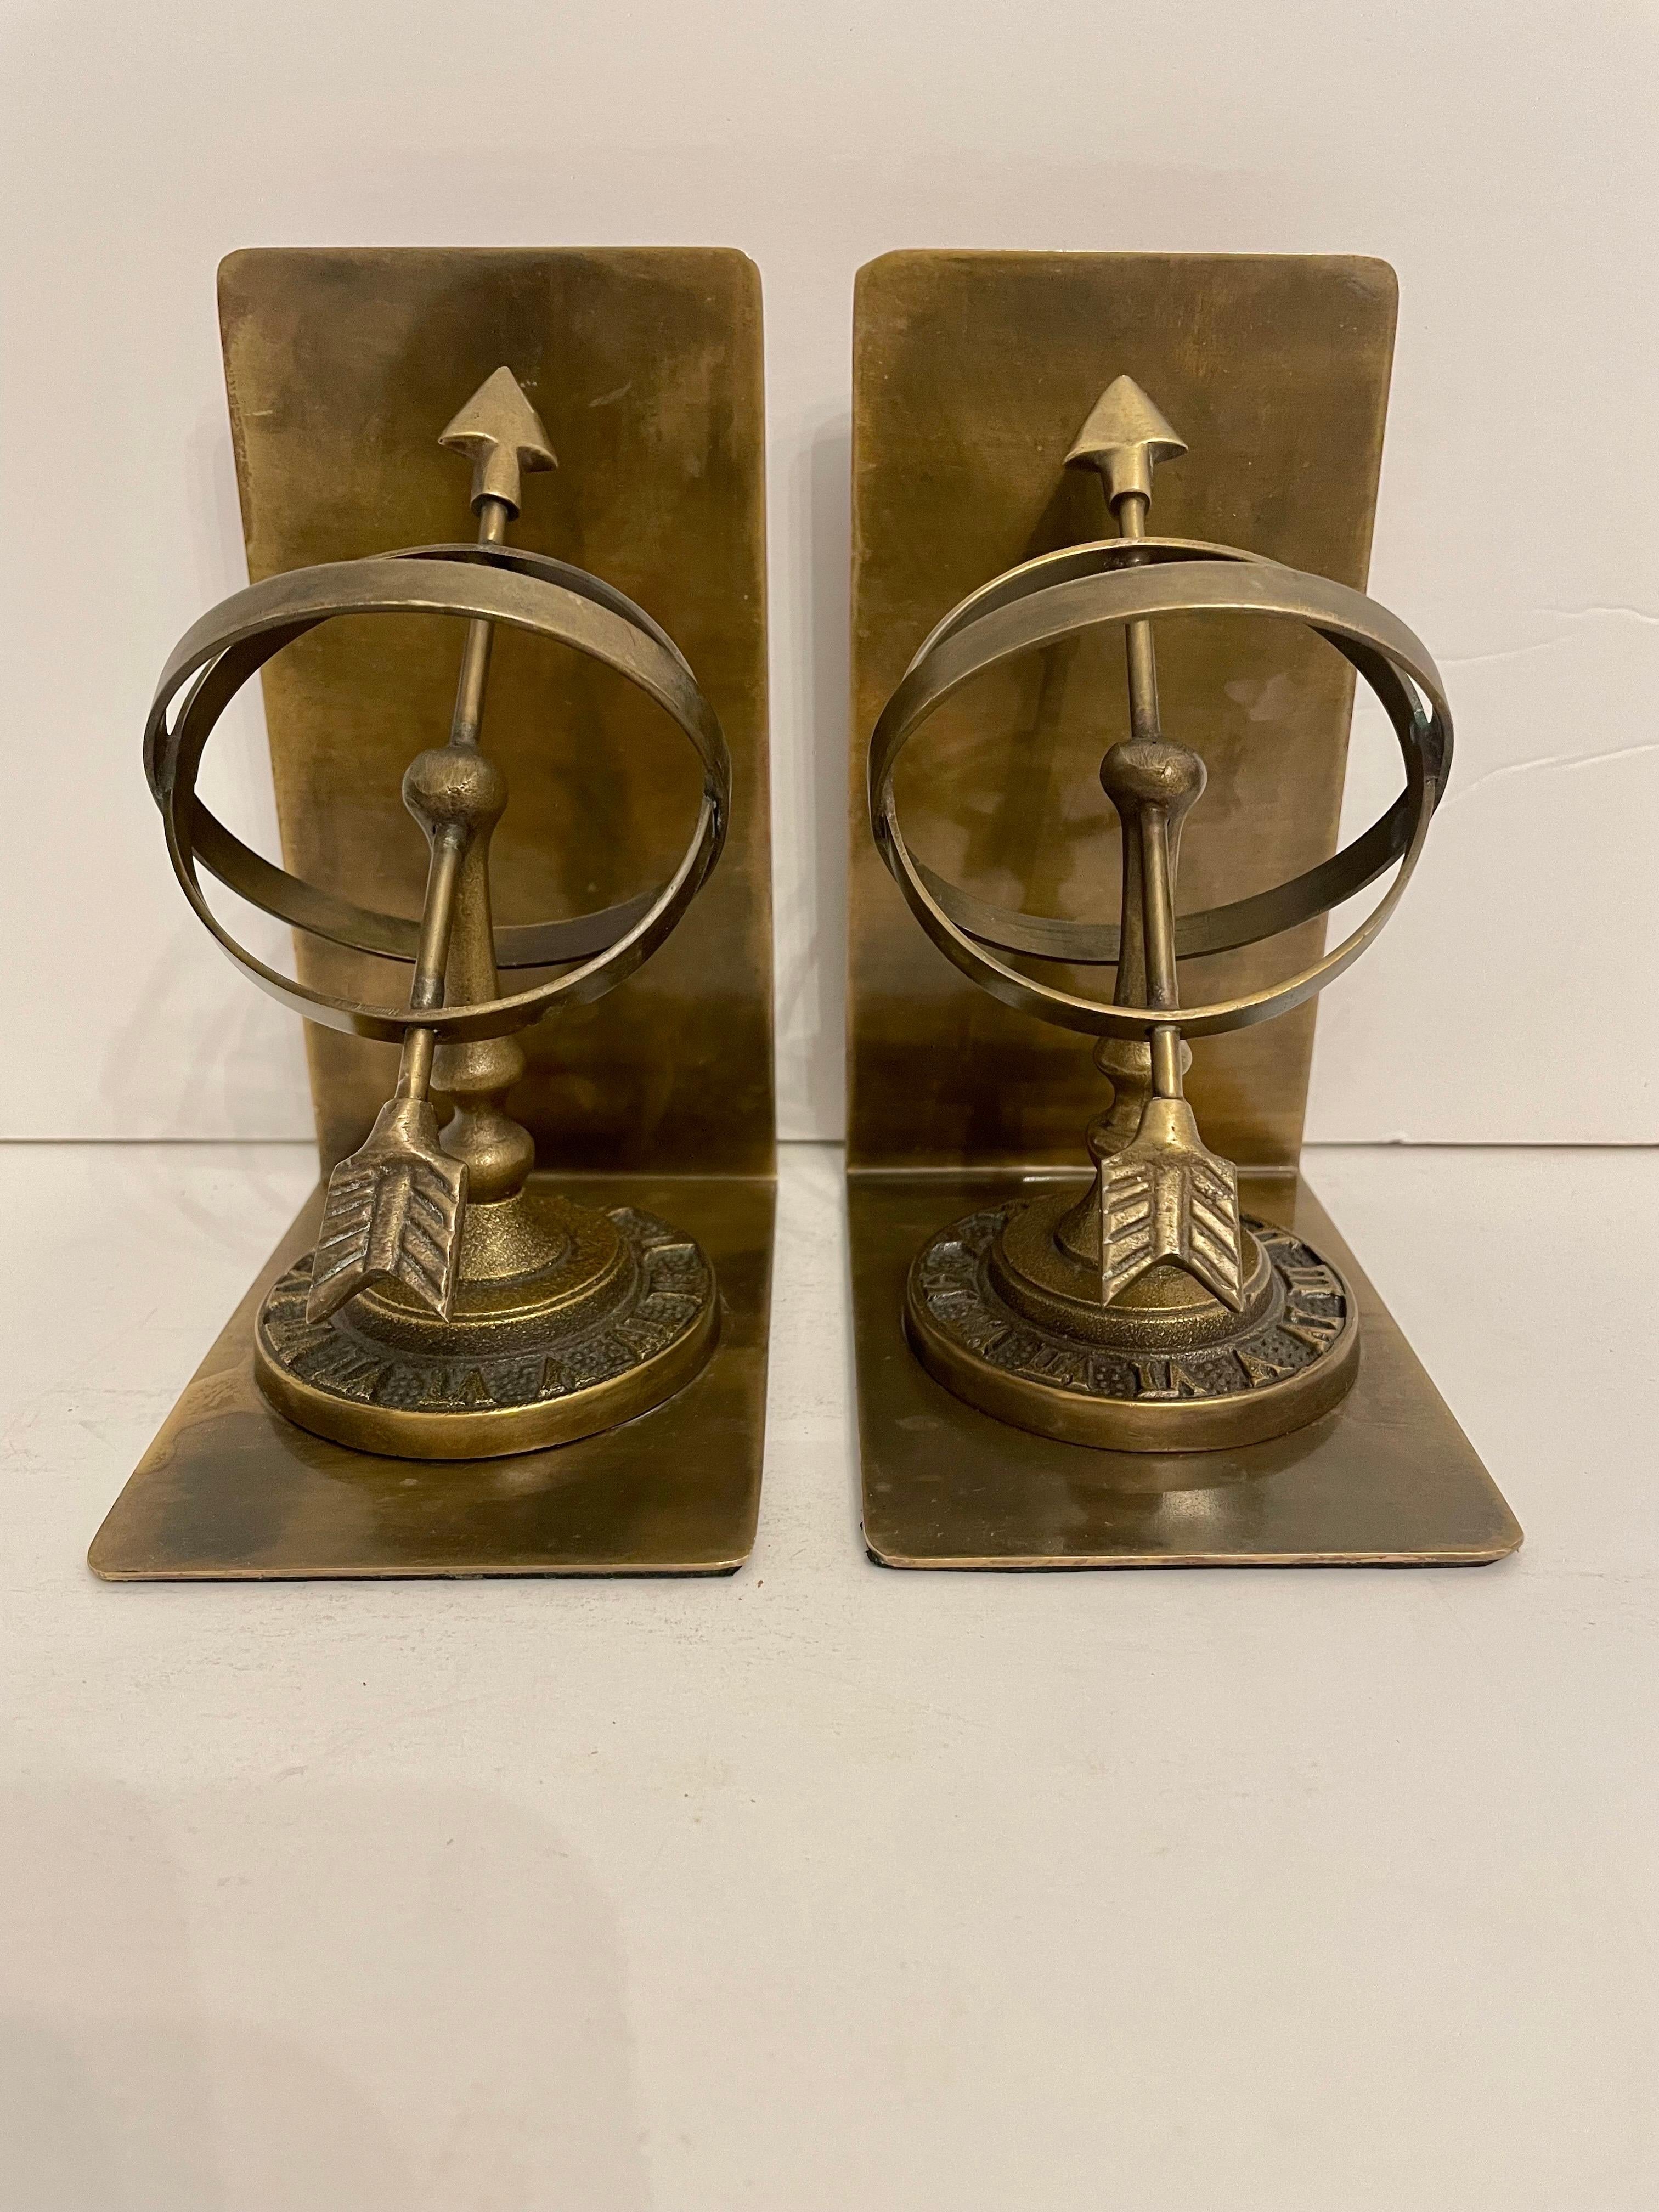 Pair of Vintage Patinated Brass Armillary Bookends. Roman numerals around base. Thin felt on bottom to prevent scratching. Good overall condition. Ready to use. Light and dark areas are reflection in photos.